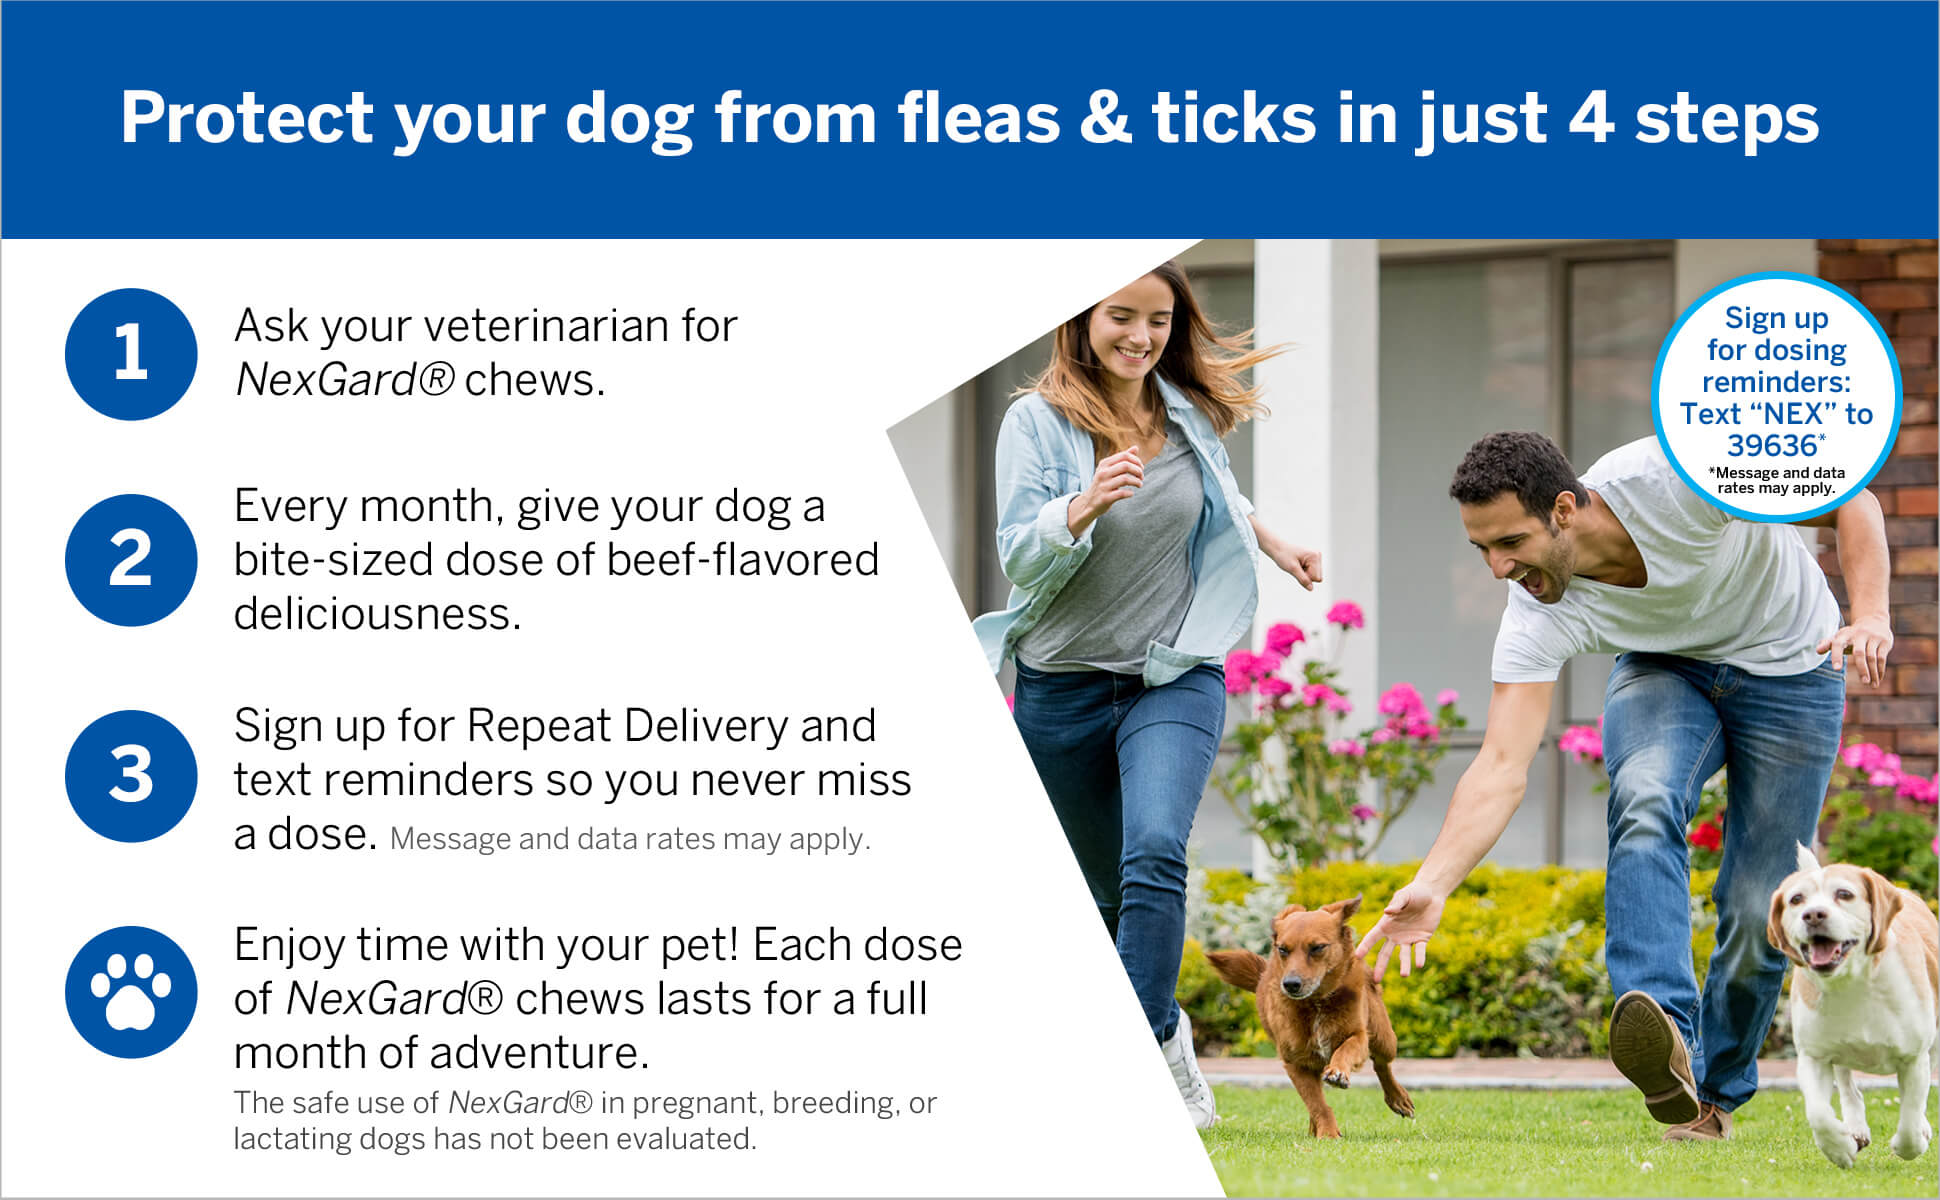 Protect your dog from fleas & ticks in just 4 steps